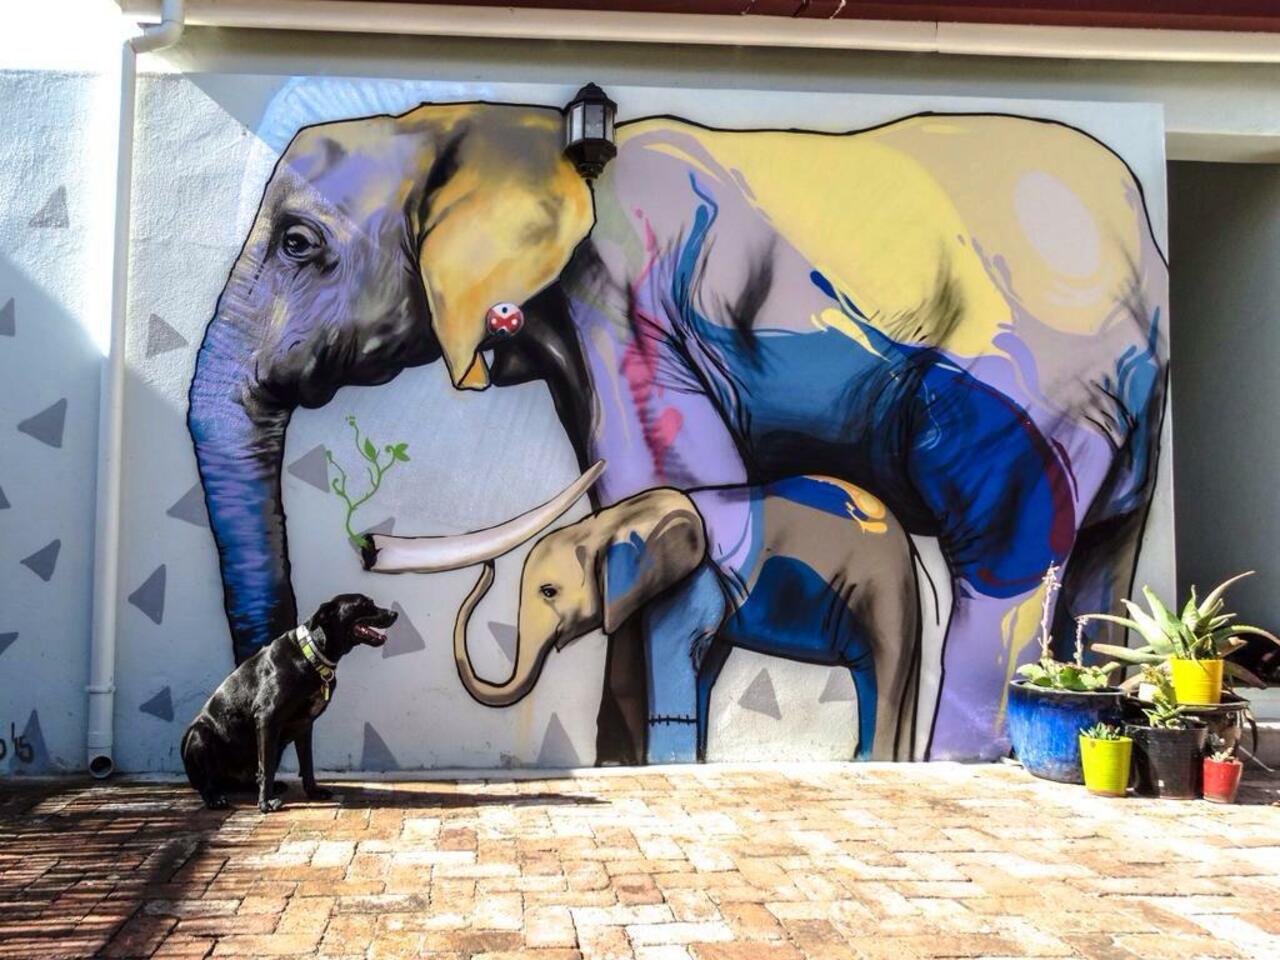 Latest nature in Street Art piece by Falko Paints In Cape Town

#art #mural #graffiti #streetart http://t.co/TqNVoEaHvg